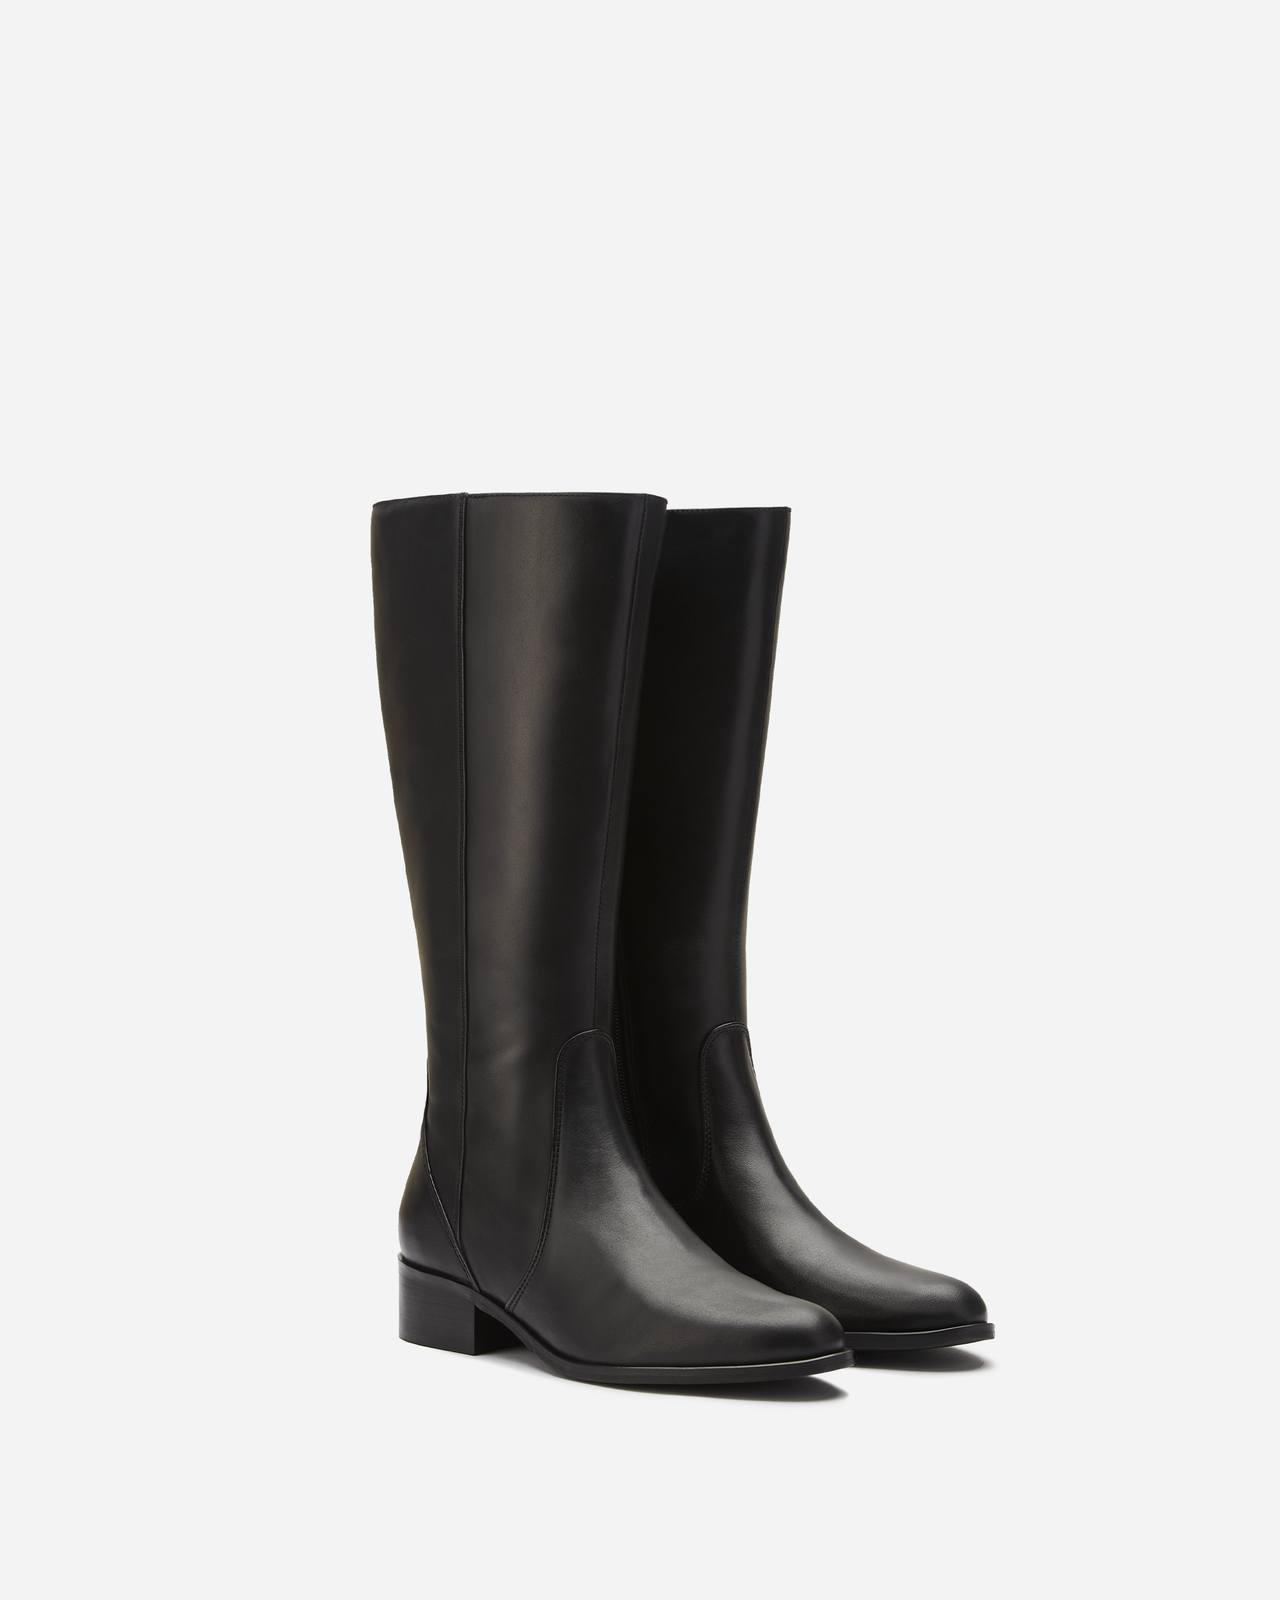 Haltham Petite Knee High Boots in Black Leather – DuoBoots